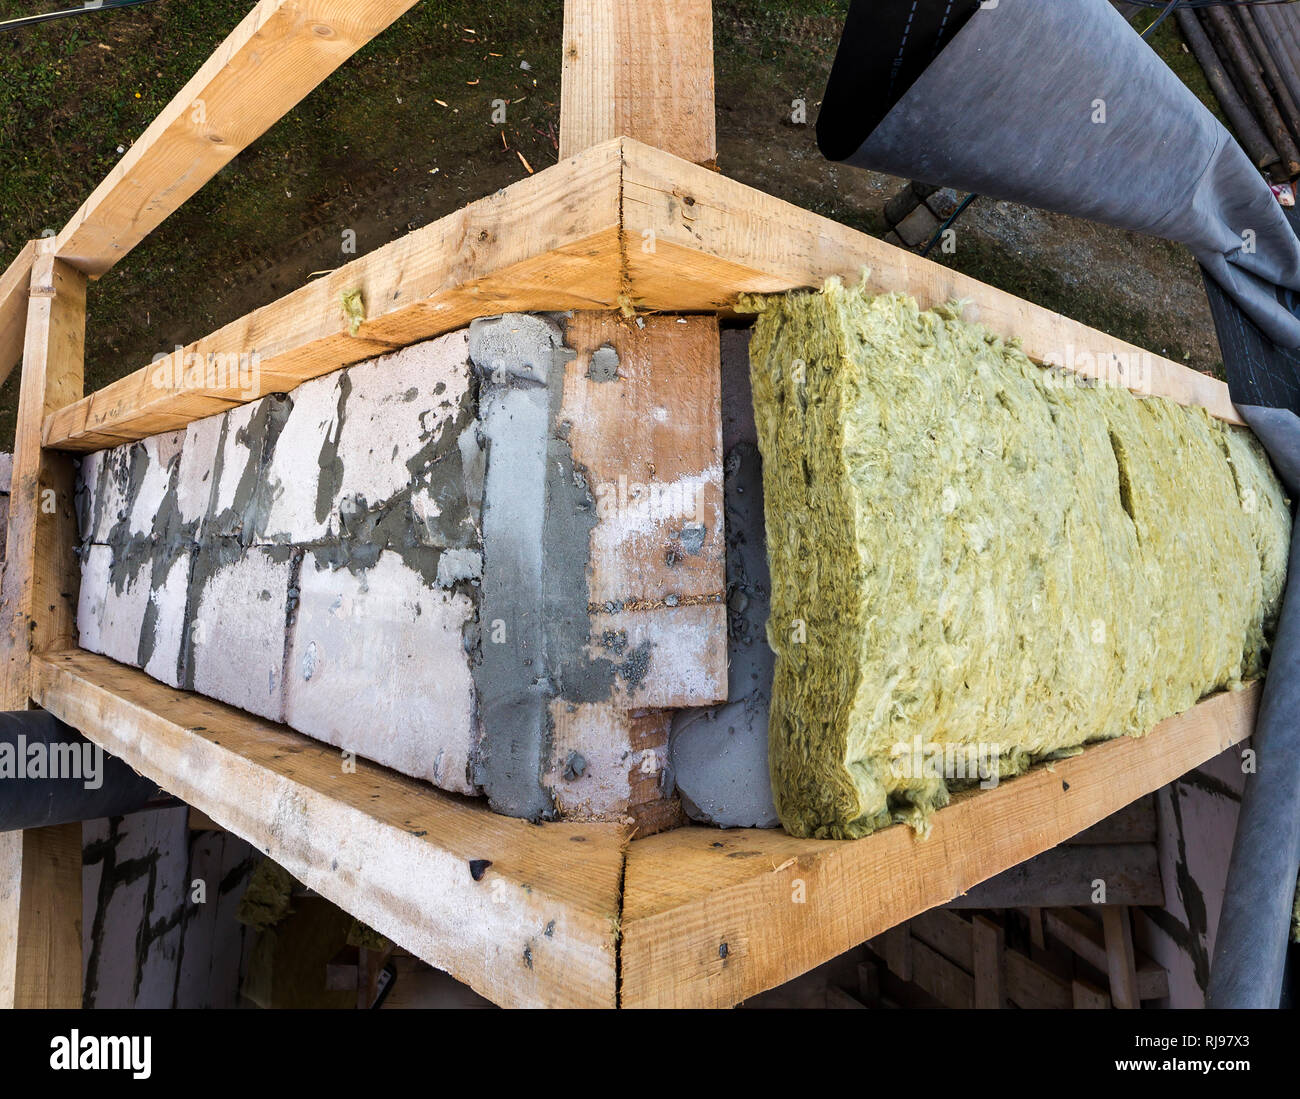 Roof construction and insulation with mineral wool. Wooden beams frame on walls of hollow foam insulation blocks. Roofing underlayment, water-resistan Stock Photo